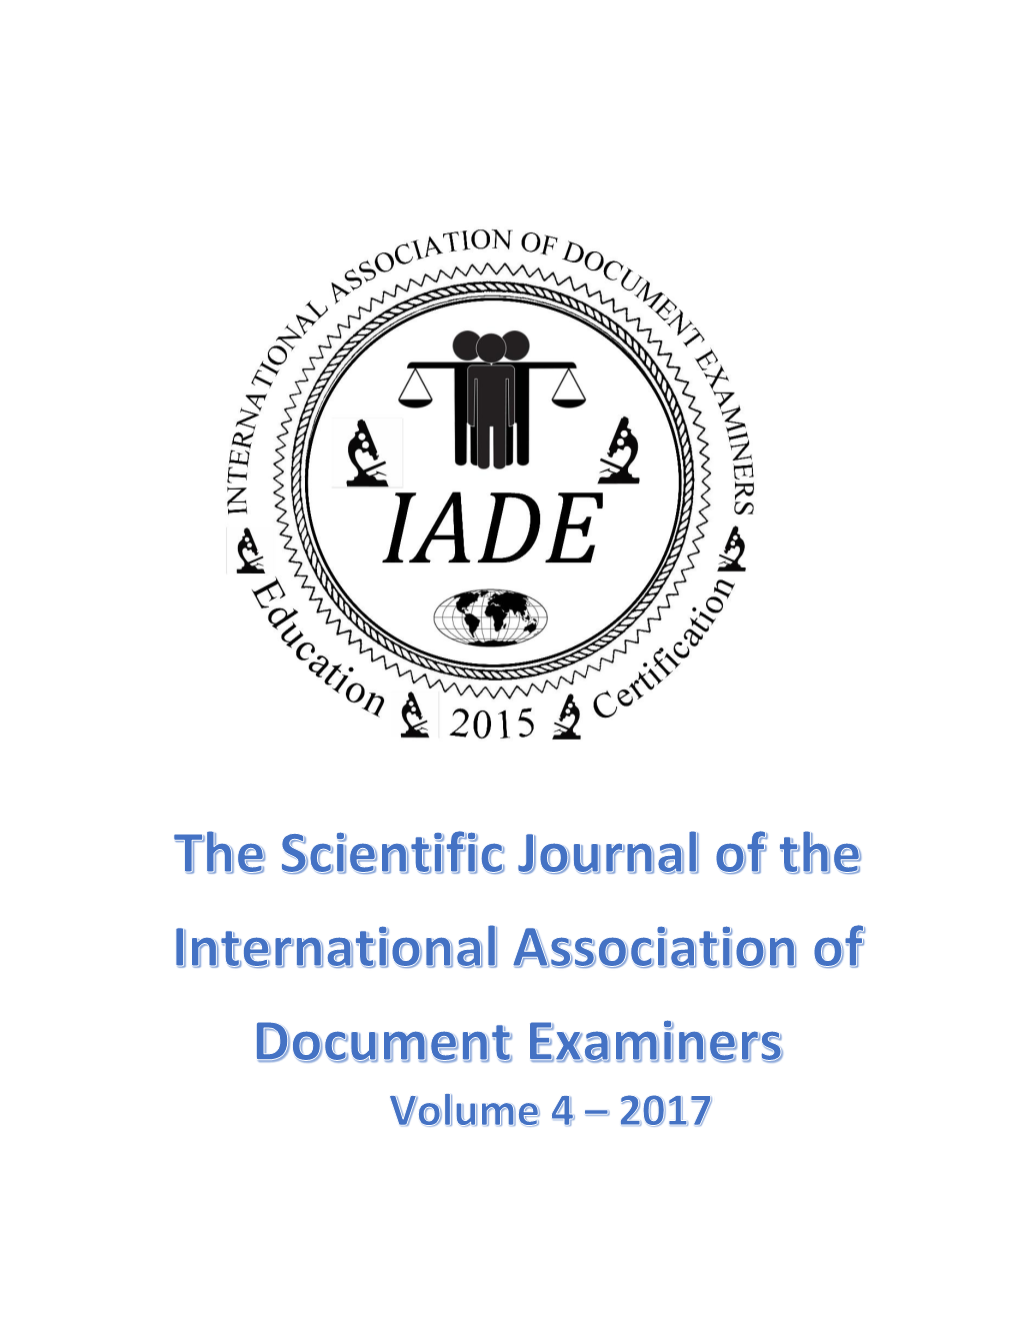 The Scientific Journal of the International Association of Document Examiners Page 1